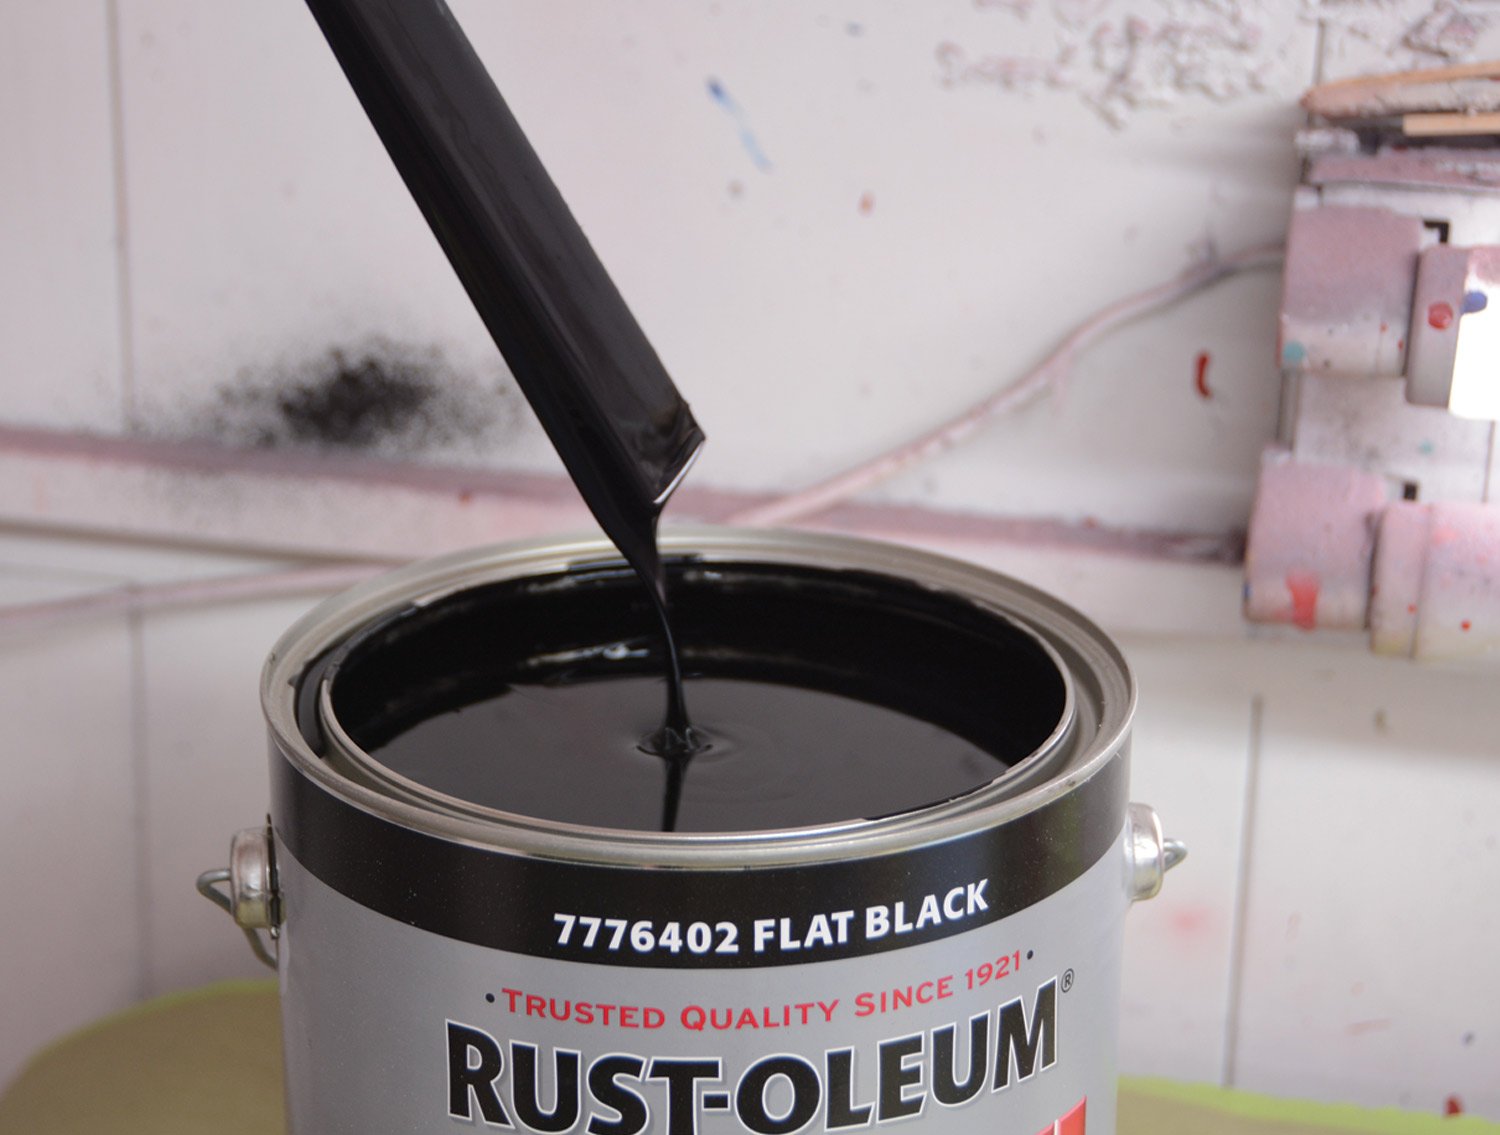 the Rust-Oleum oil-based enamel paint is mixed and prepared for use